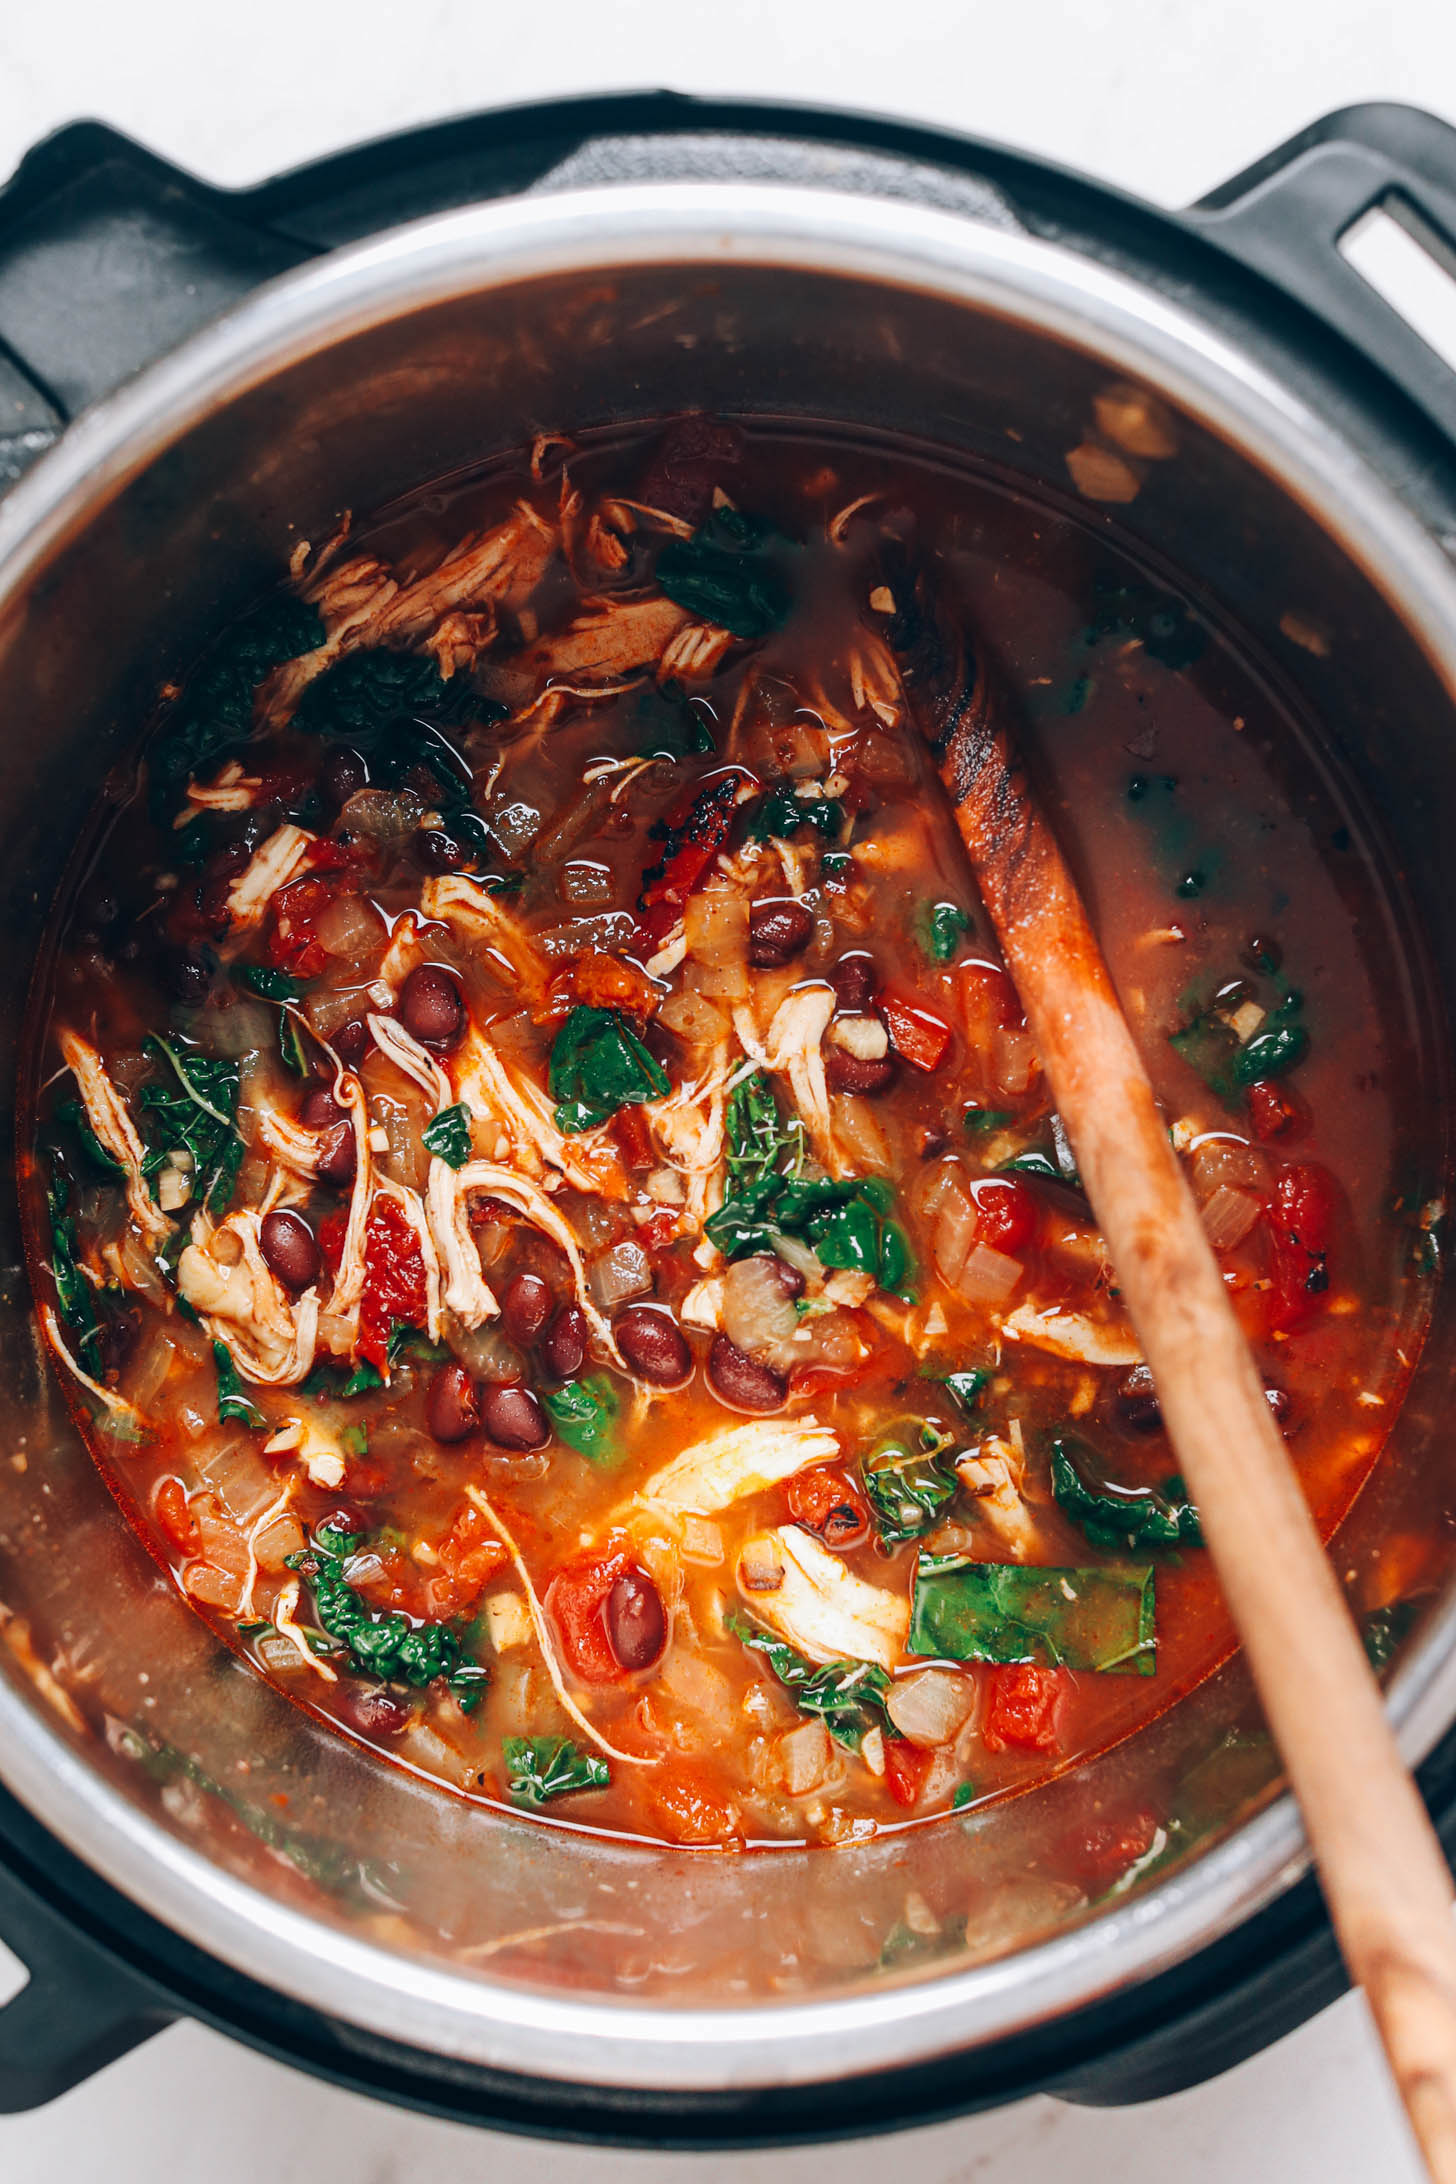 Chicken tortilla soup in the Instant Pot